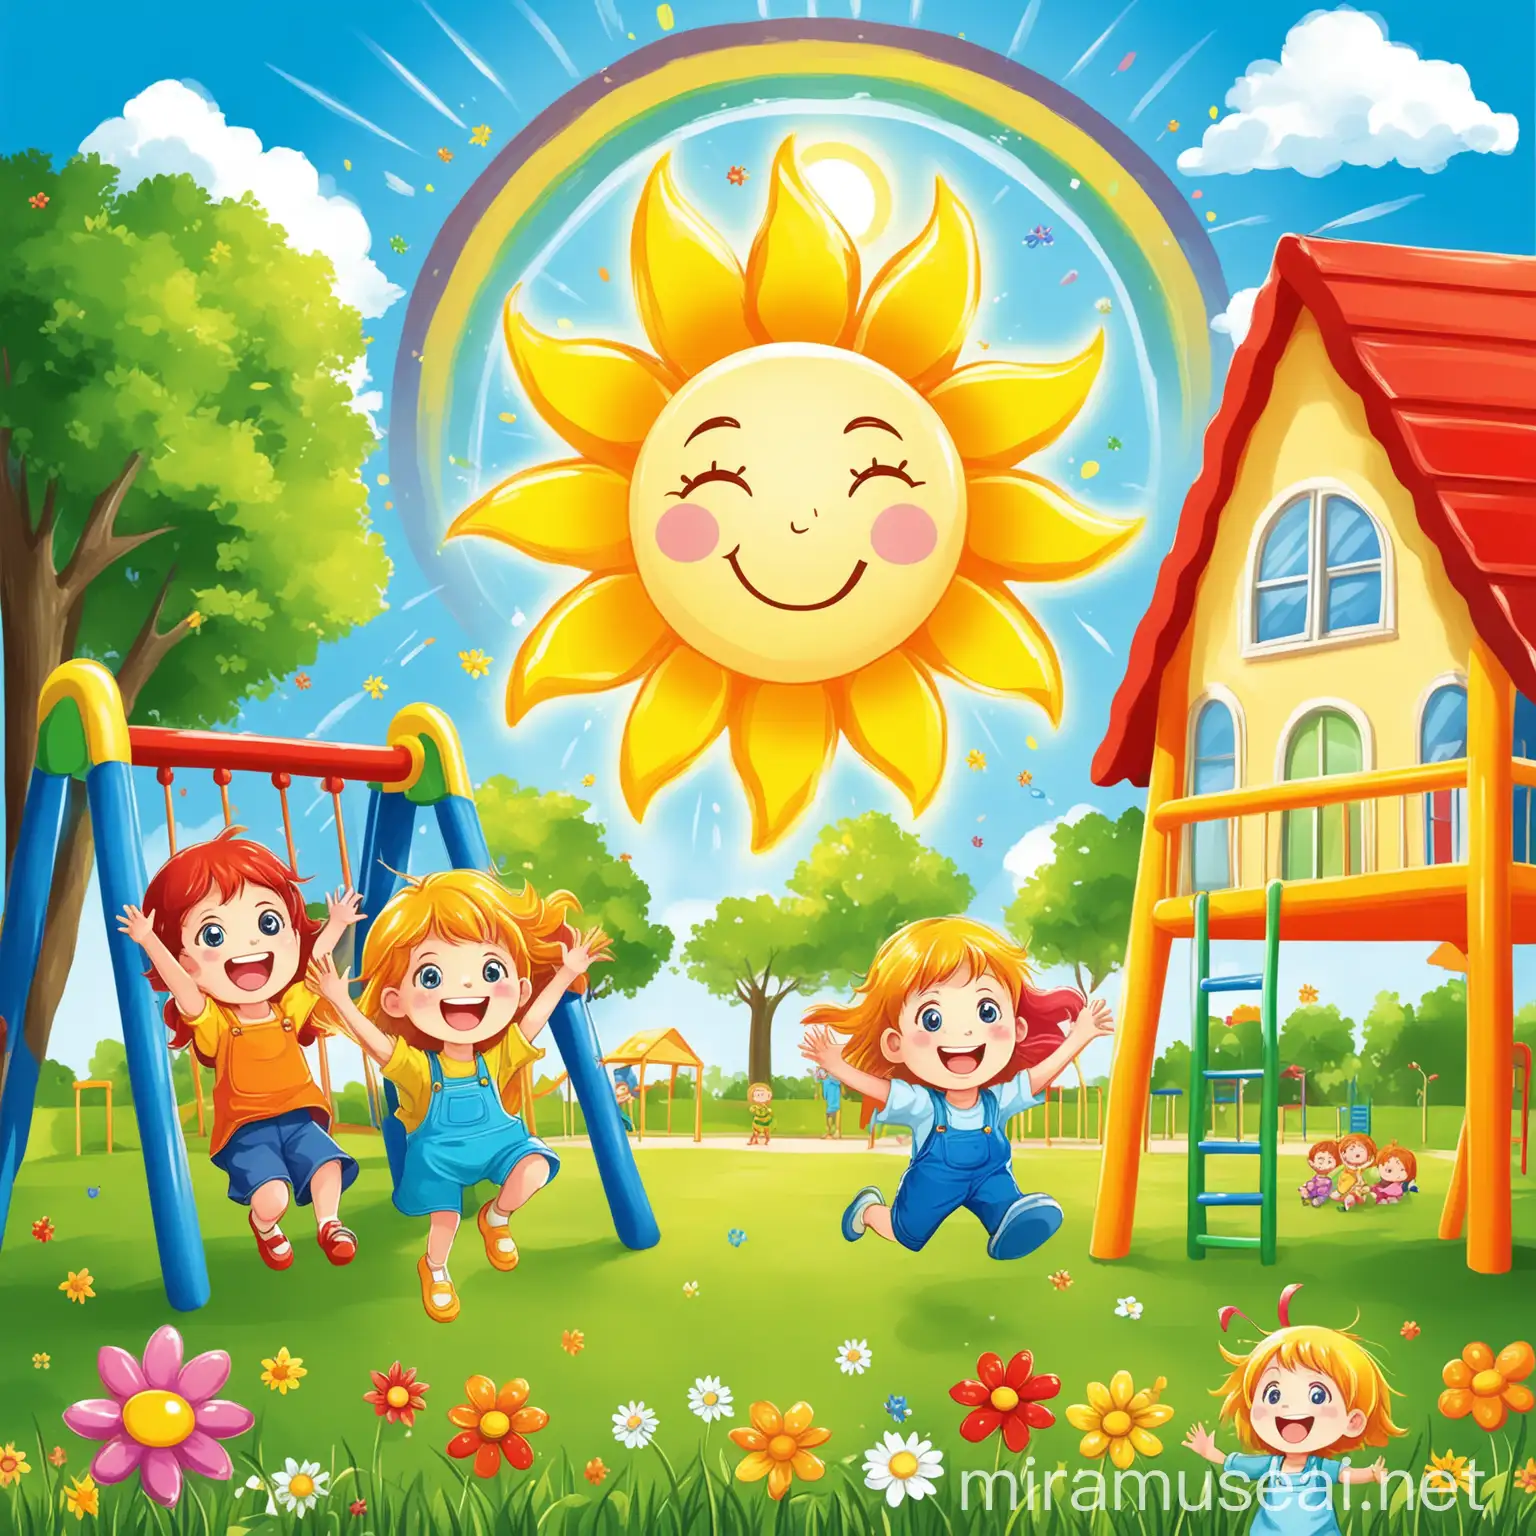 Create a vibrant and cheerful banner for a kindergarten with the theme "Sunshine". The banner should feature a large, smiling sun with rays radiating outwards, surrounded by happy children playing and laughing. Include elements like colorful flowers, green grass, and a clear blue sky. The overall design should be engaging, fun, and welcoming, evoking a sense of warmth and happiness. Ensure the style is bright and colorful, suitable for a playful and joyful environment on children's playground verandas.